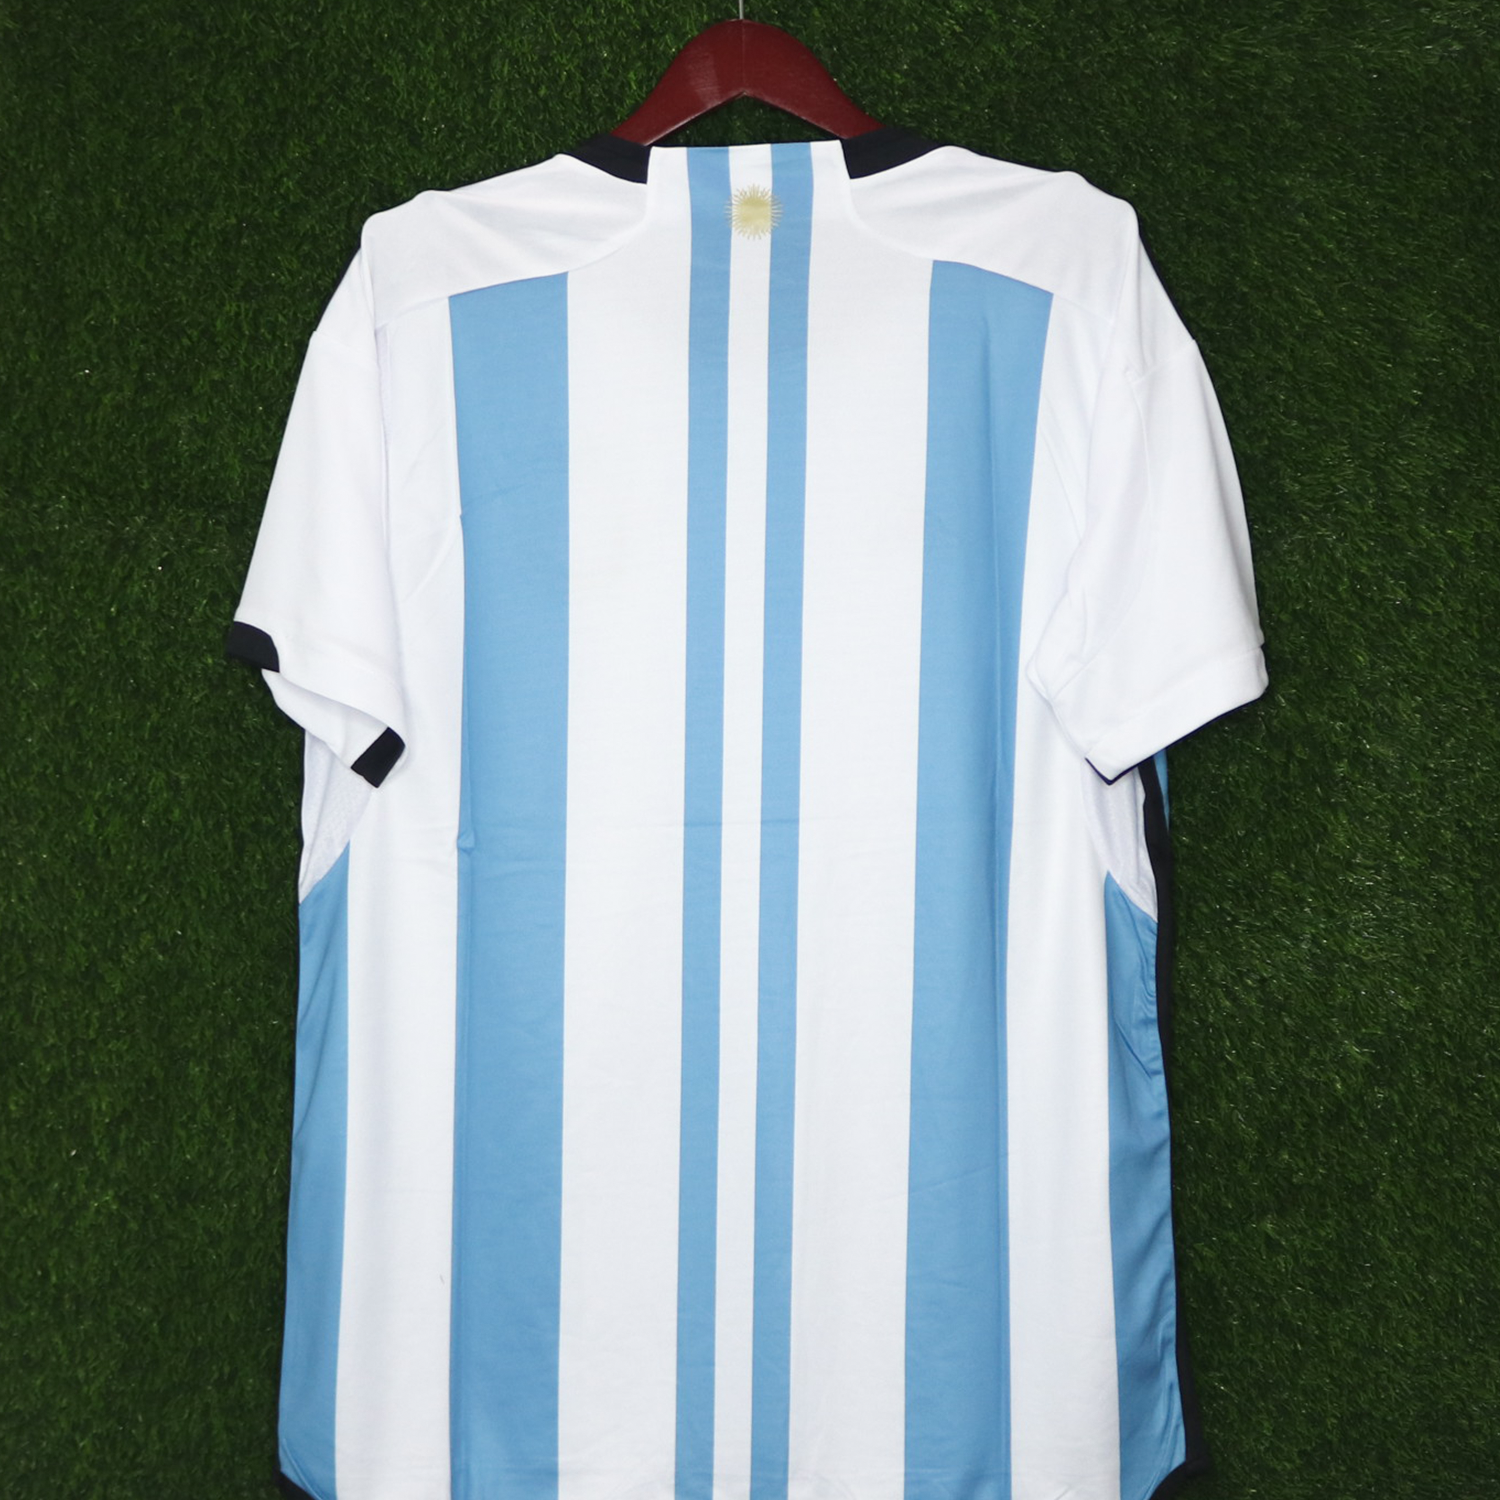 argentina away jersey 2022 world cup in bangladesh,